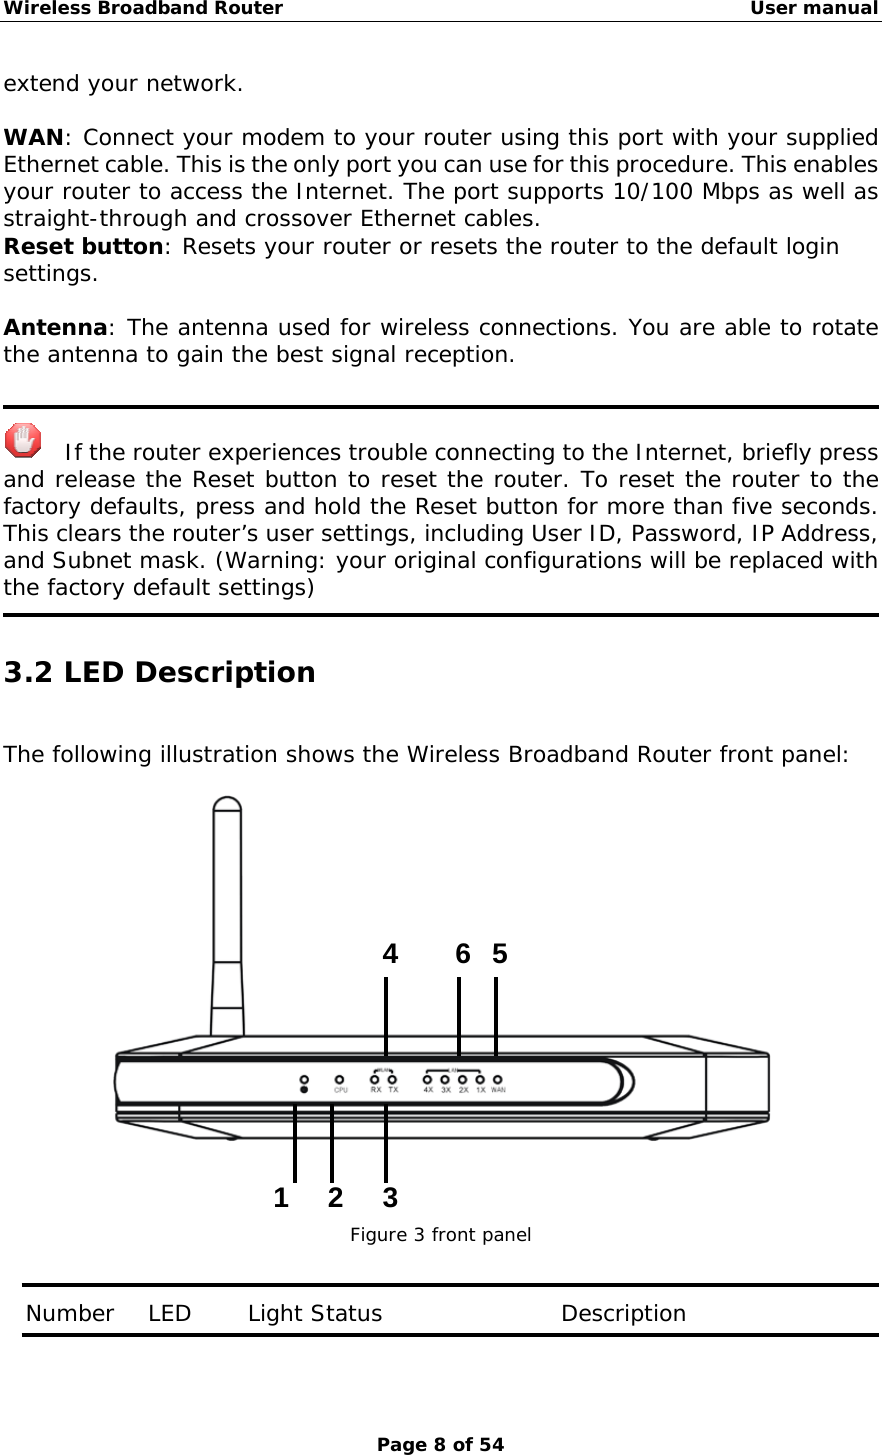 Wireless Broadband Router                                                   User manual Page 8 of 54 extend your network.  WAN: Connect your modem to your router using this port with your supplied Ethernet cable. This is the only port you can use for this procedure. This enables your router to access the Internet. The port supports 10/100 Mbps as well as straight-through and crossover Ethernet cables. Reset button: Resets your router or resets the router to the default login settings.  Antenna: The antenna used for wireless connections. You are able to rotate the antenna to gain the best signal reception.     If the router experiences trouble connecting to the Internet, briefly press and release the Reset button to reset the router. To reset the router to the factory defaults, press and hold the Reset button for more than five seconds. This clears the router’s user settings, including User ID, Password, IP Address, and Subnet mask. (Warning: your original configurations will be replaced with the factory default settings)  3.2 LED Description The following illustration shows the Wireless Broadband Router front panel:      Figure 3 front panel   Number   LED     Light Status                Description  1 2 3 4 5 6 